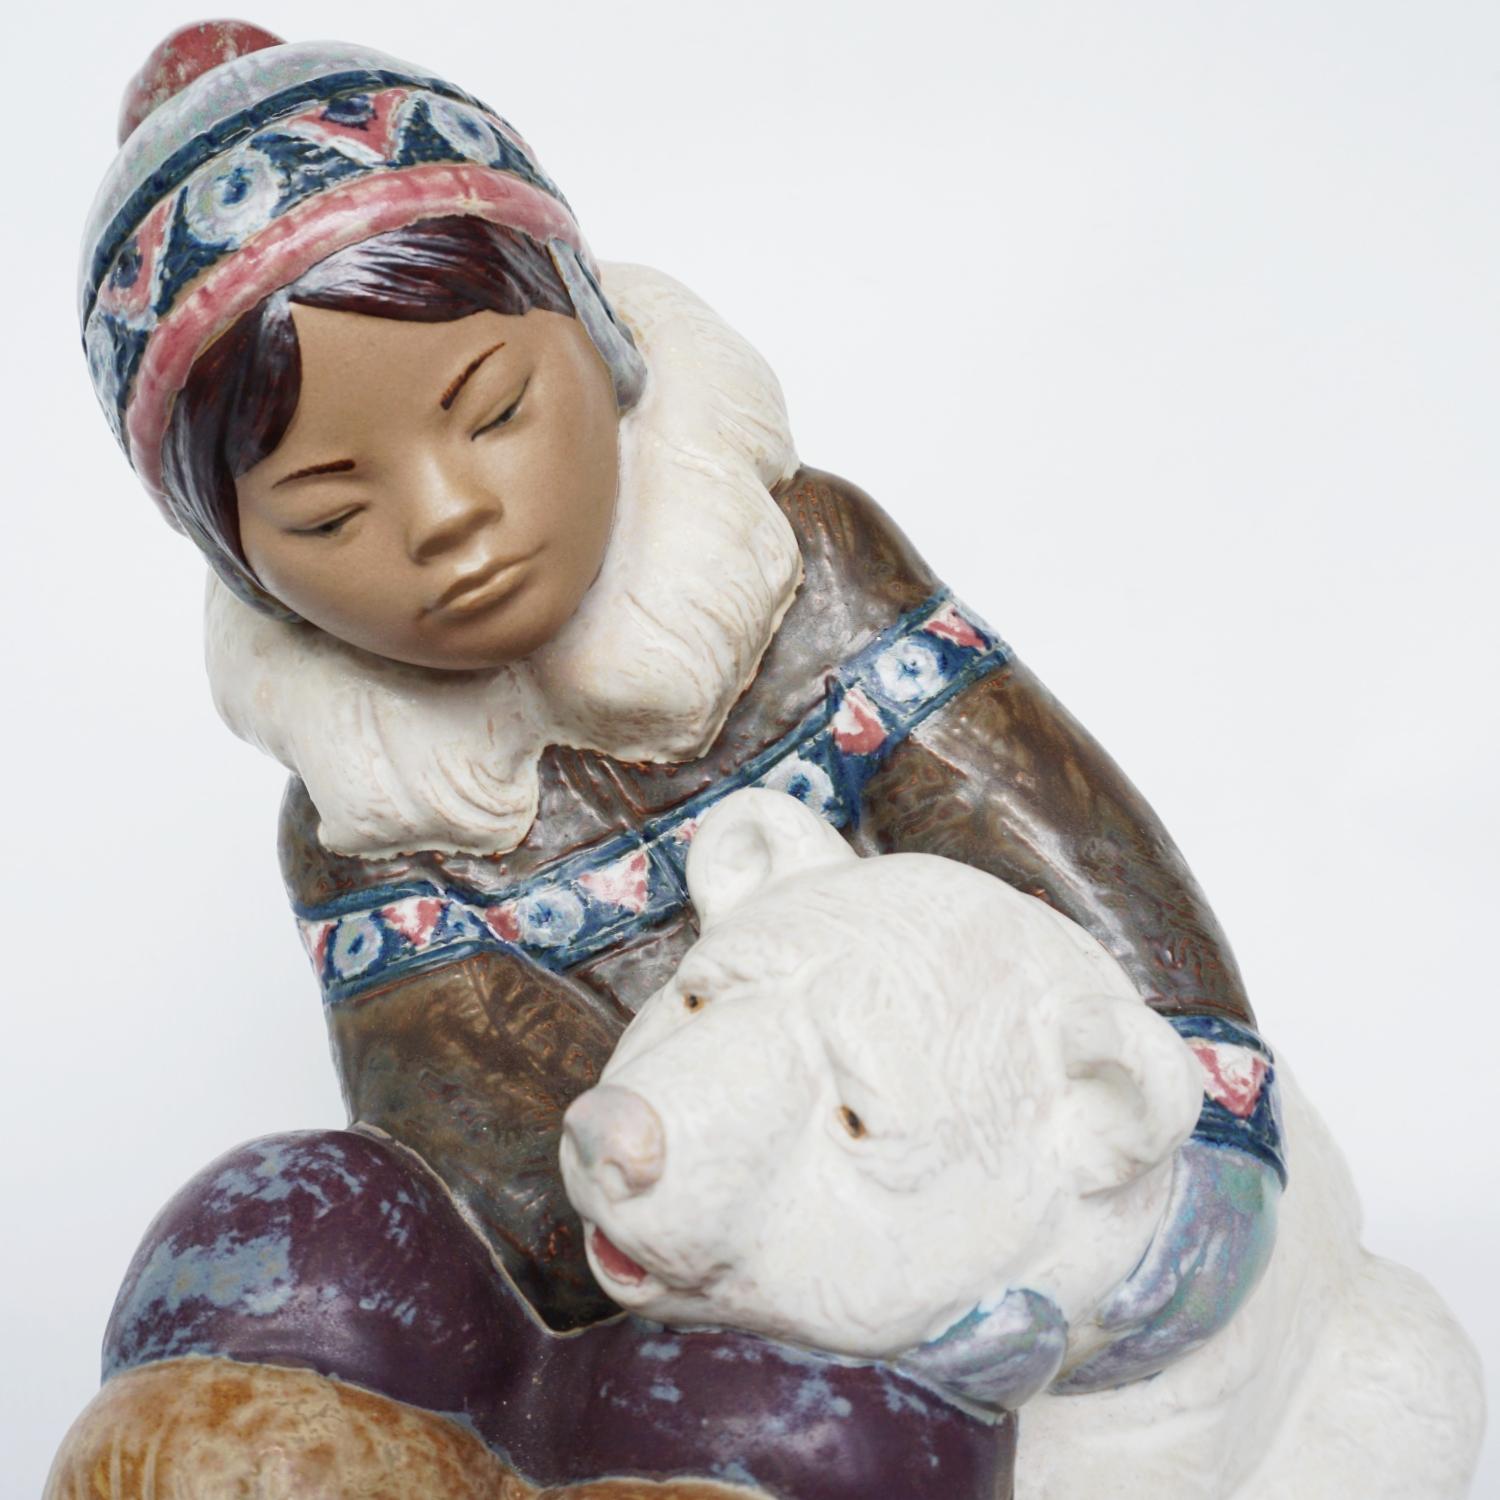 'Inuit Girl Playing' pottery figure sculpted by Juan Huerta for Lladró. First issued in 1978. Depicting a young Inuit girl sitting and playing with a Polar Bear cub. Excellent fine hand painted detail. Numbered 2097.

Dimensions: H 23cm, W 16cm, D